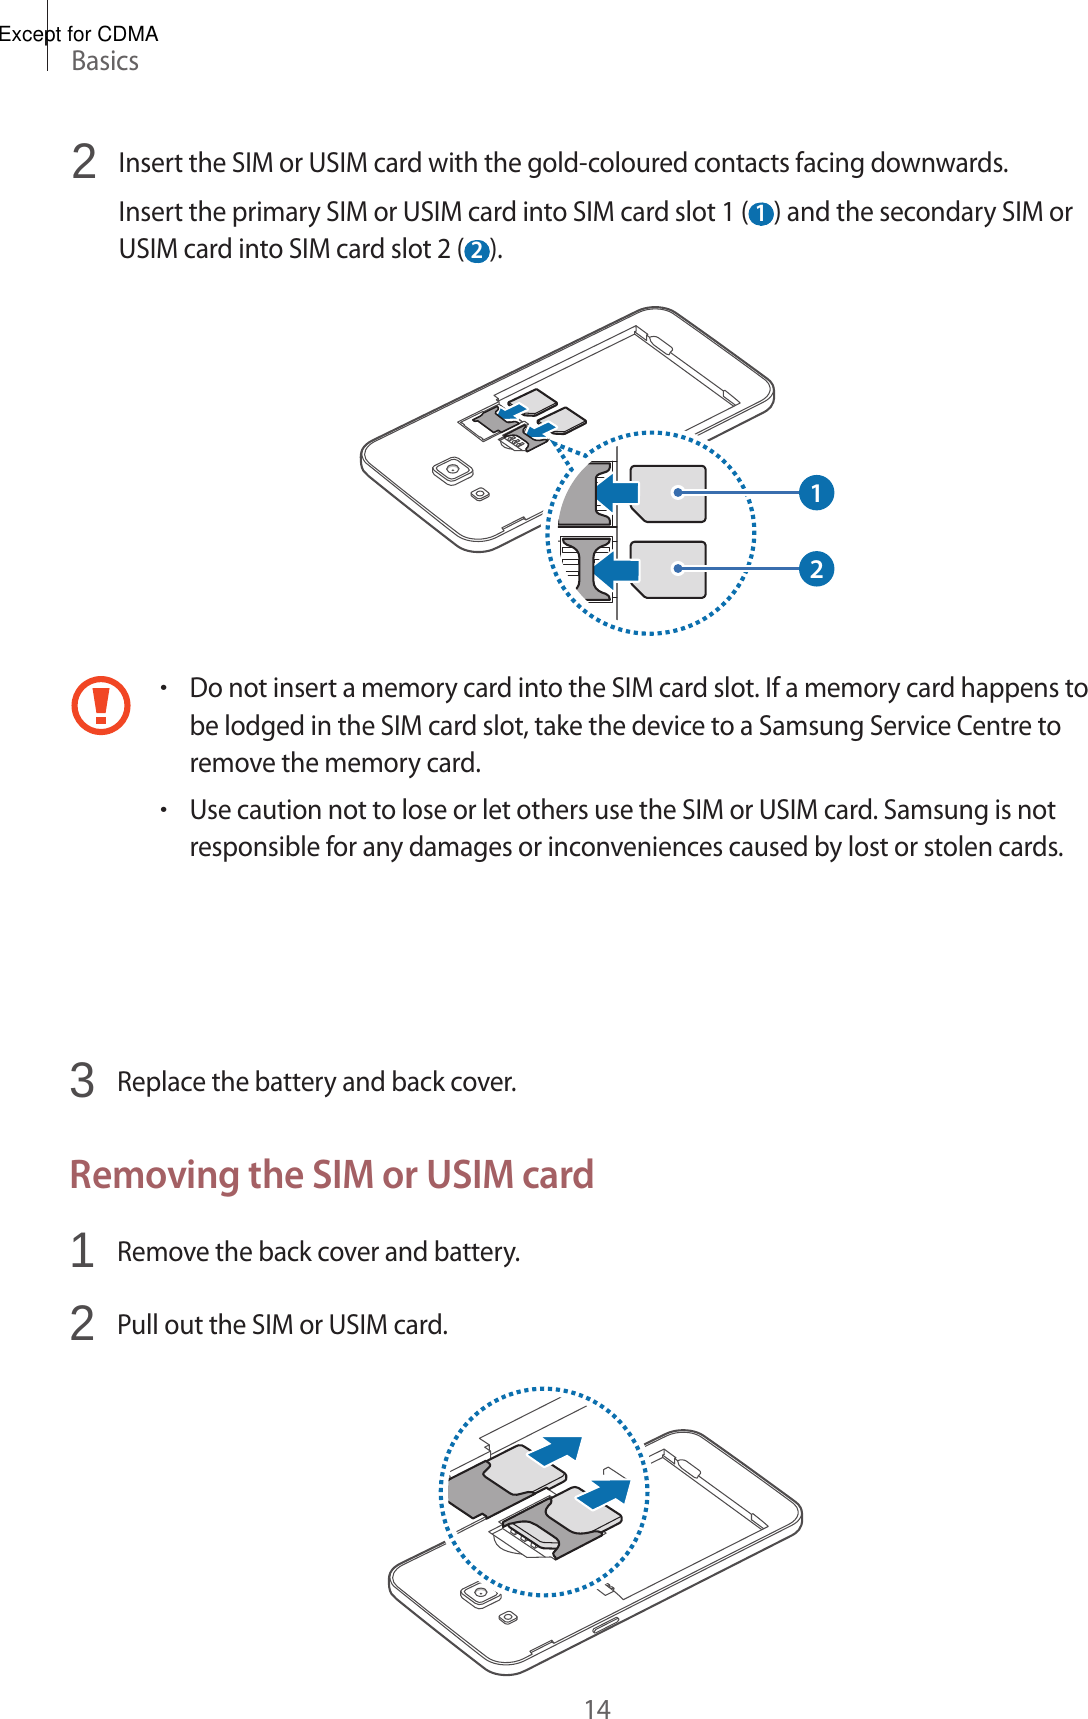 Basics142  Insert the SIM or USIM card with the gold-coloured contacts facing downwards.Insert the primary SIM or USIM card into SIM card slot 1 ( 1 ) and the secondary SIM or USIM card into SIM card slot 2 ( 2 ).12•Do not insert a memory card into the SIM card slot. If a memory card happens to be lodged in the SIM card slot, take the device to a Samsung Service Centre to remove the memory card.•Use caution not to lose or let others use the SIM or USIM card. Samsung is not responsible for any damages or inconveniences caused by lost or stolen cards.3 Replace the battery and back cover.Removing the SIM or USIM card1 Remove the back cover and battery.2 Pull out the SIM or USIM card.Except for CDMA